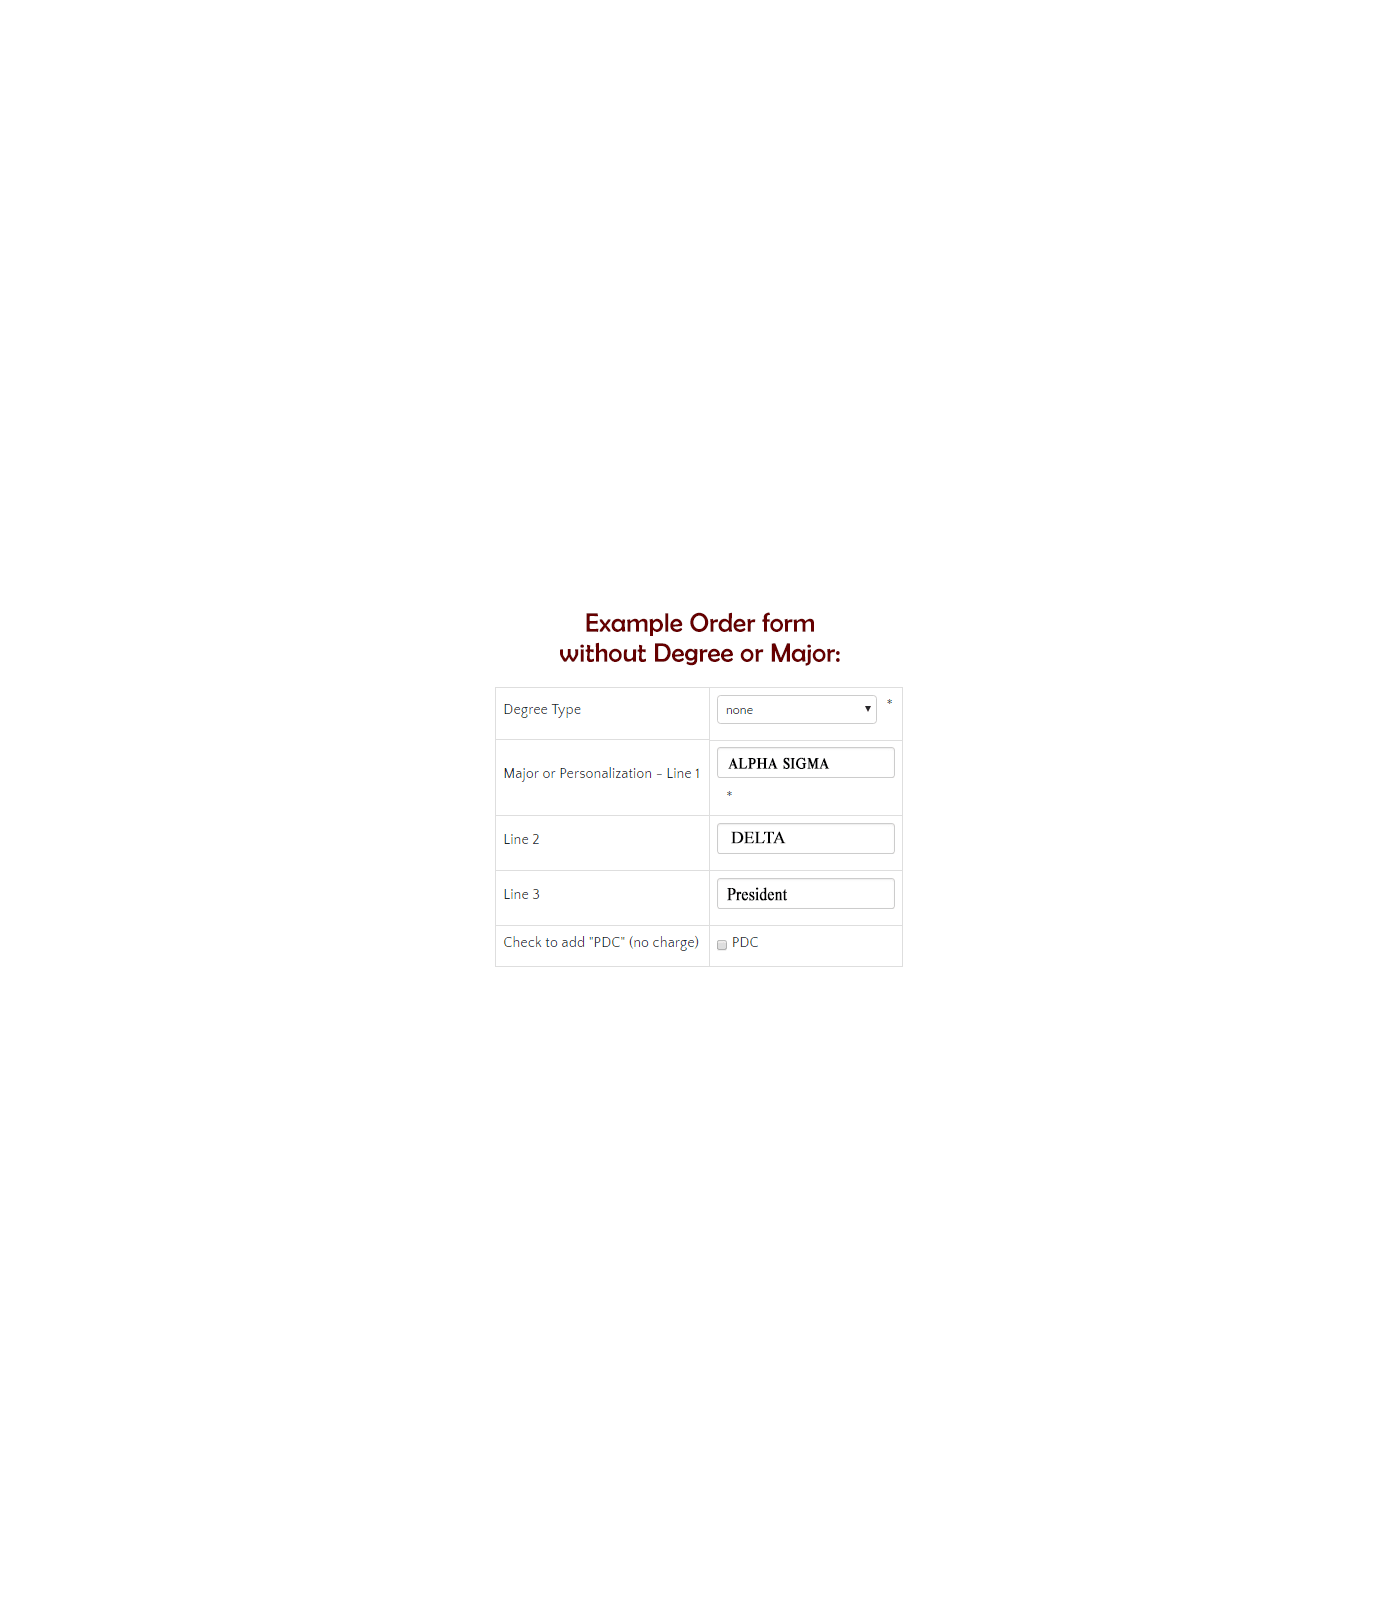 example_order_form_without_degree_or_major_306477350